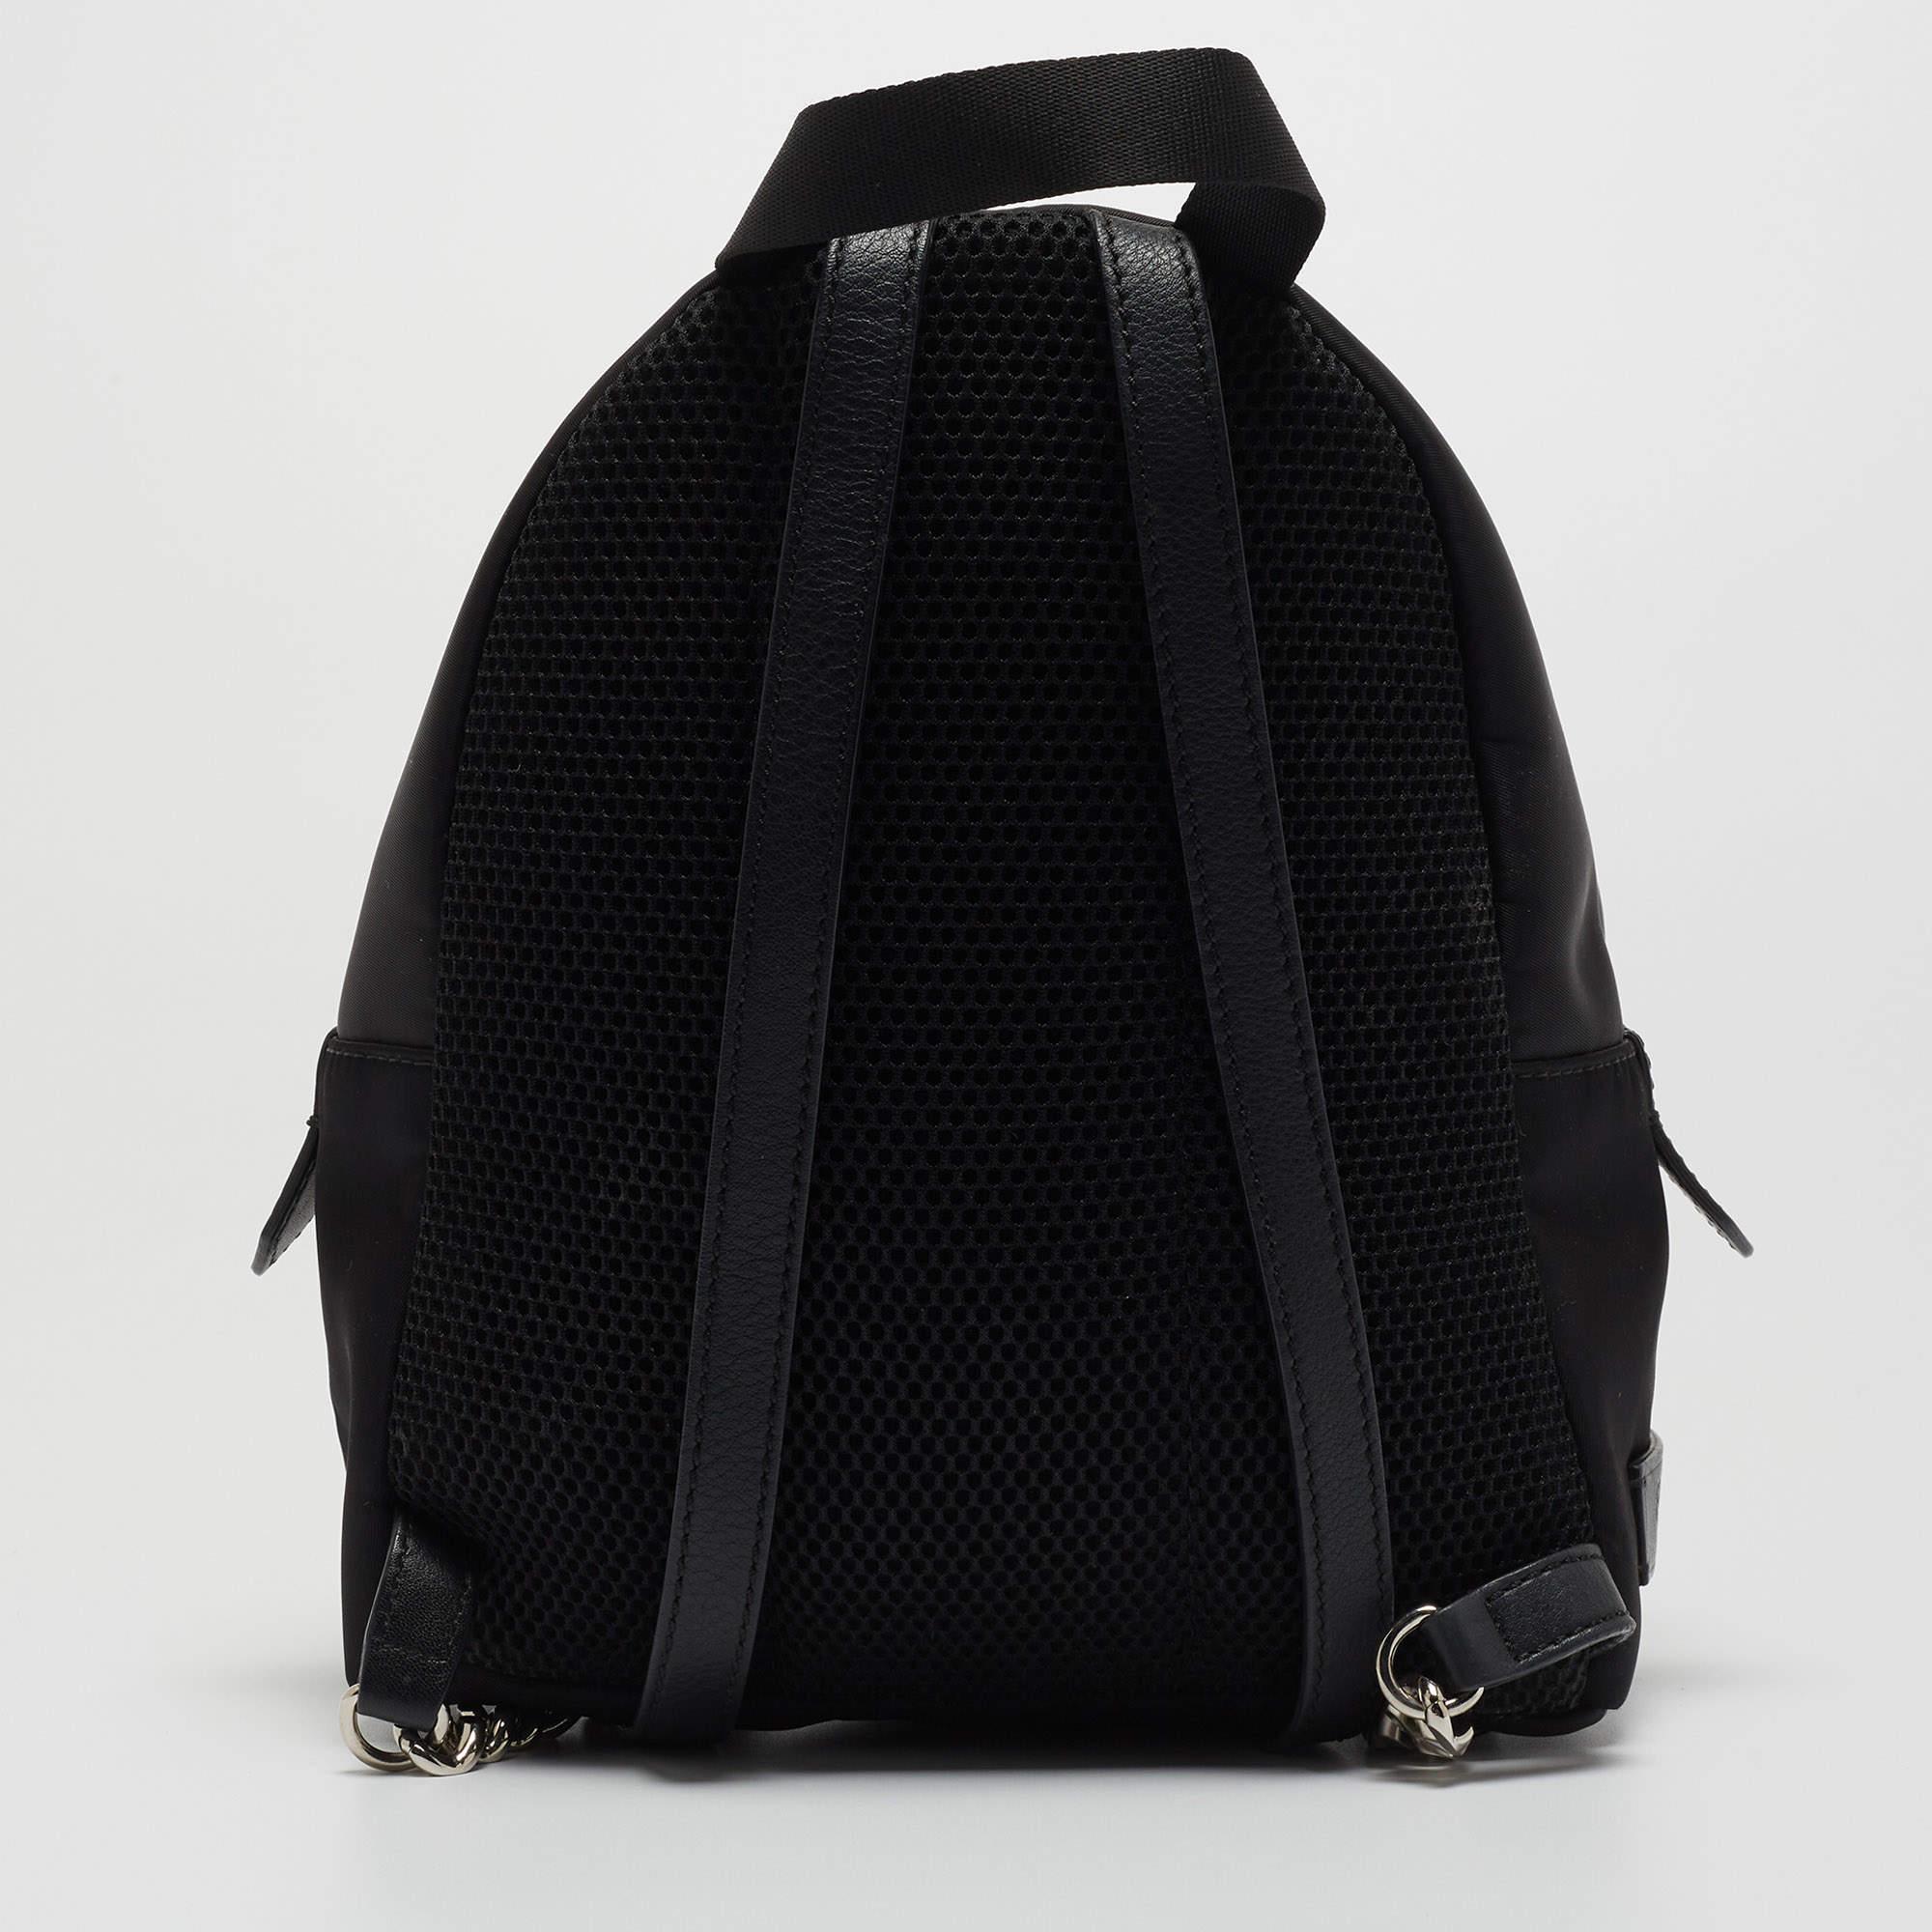 This practical and fashionable backpack will come in handy for daily use or as a style statement. It is smartly designed with a spacious interior for your belongings. Two shoulder straps make it ready to be yours.

Includes: Original Dustbag